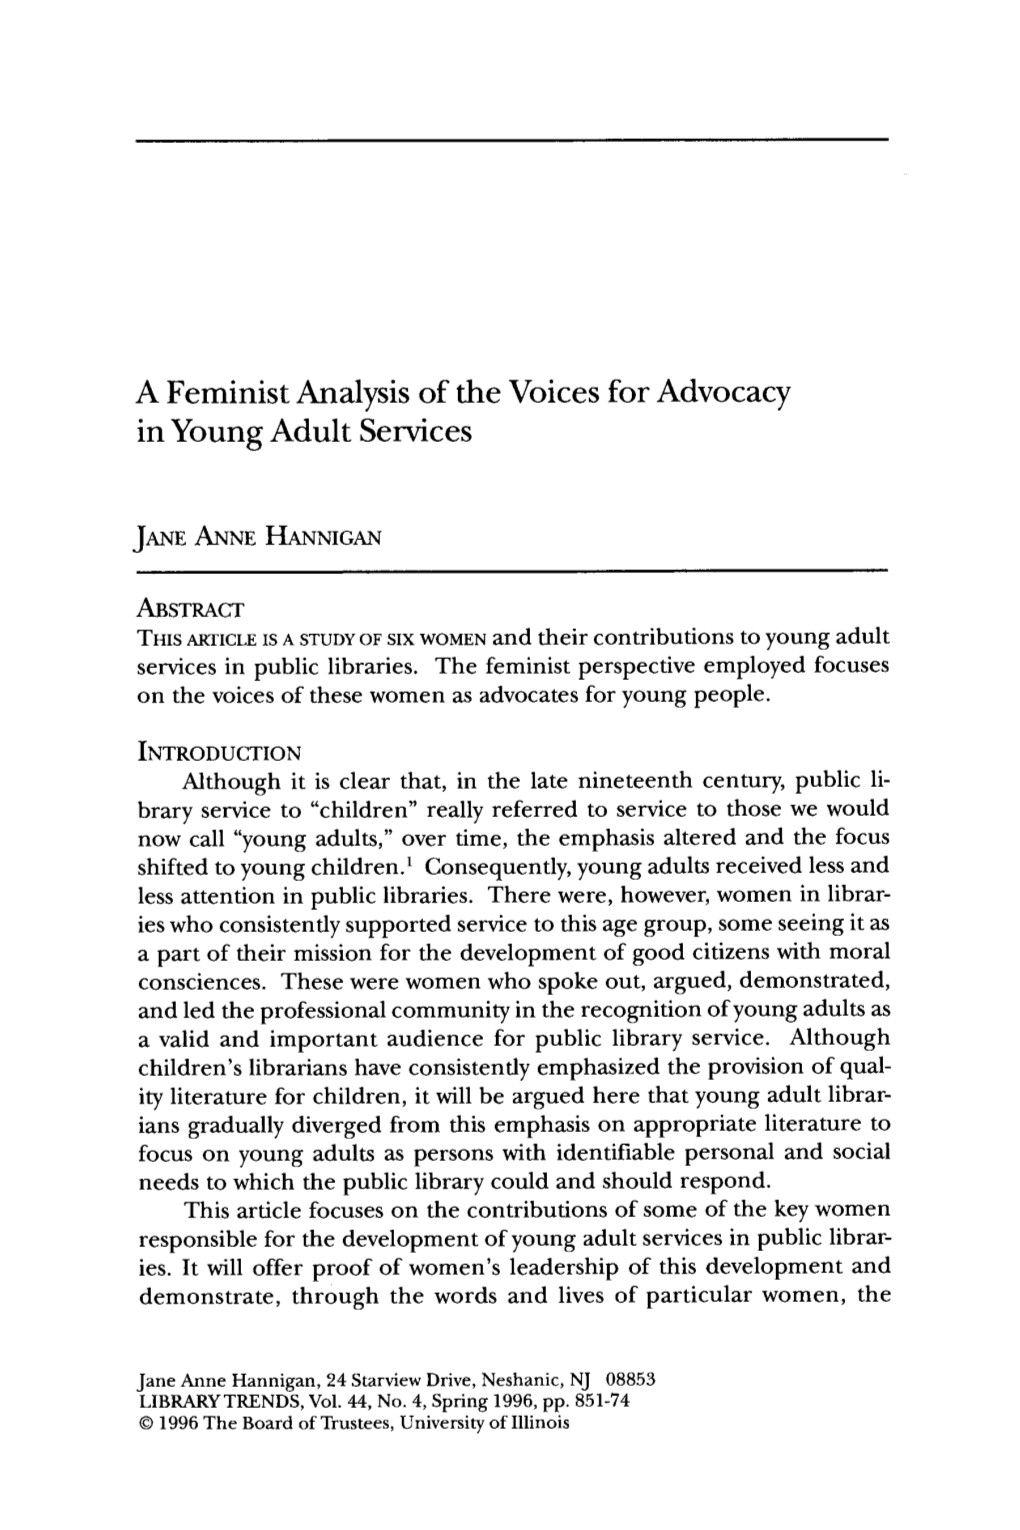 A Feminist Analysis of the Voices for Advocacy in Young Adult Services